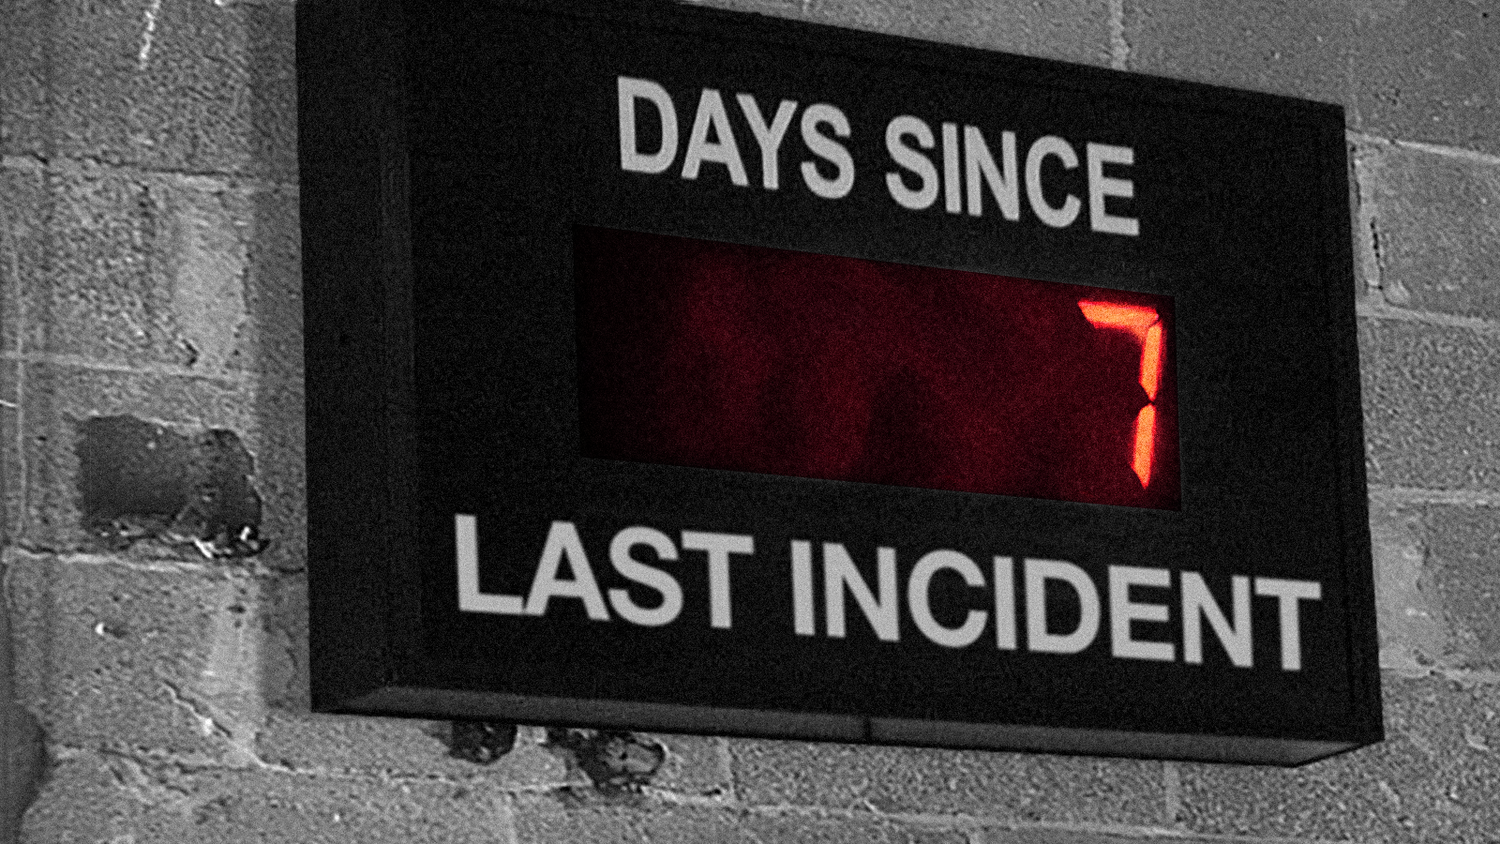 Days since last. Incident sign. Days since last incident. Without incident.